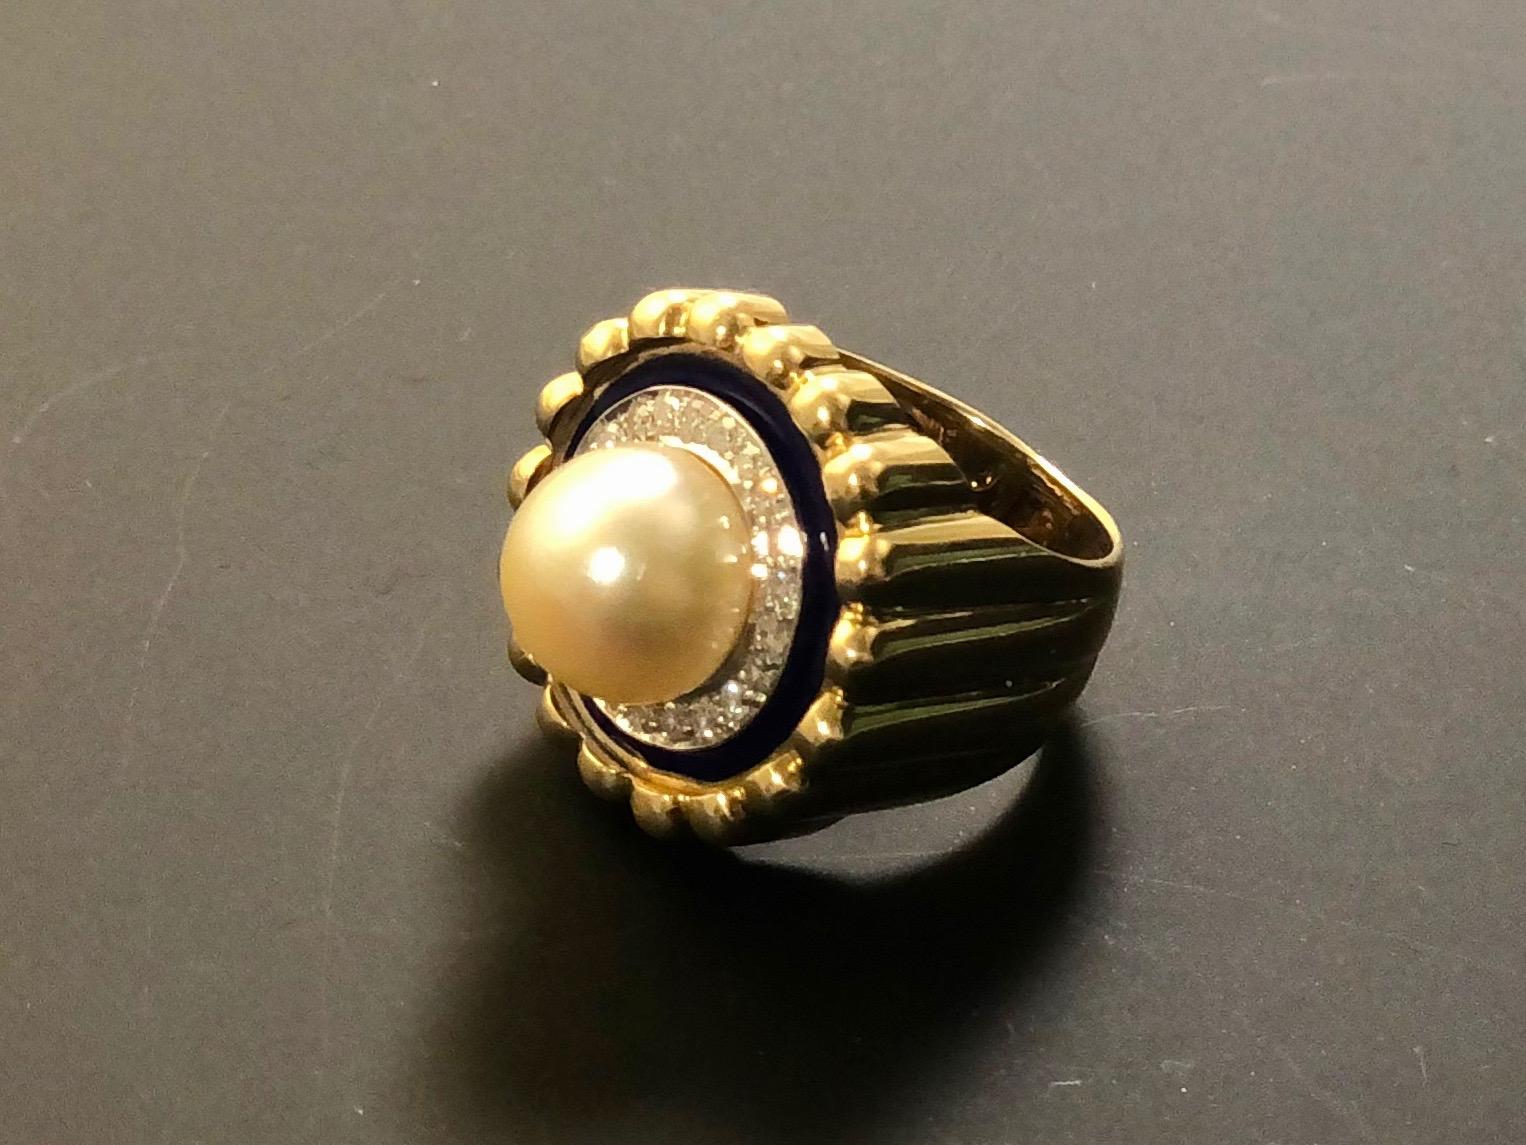 Brilliant Cut Gold, Diamonds and Pearl Vintage Ring